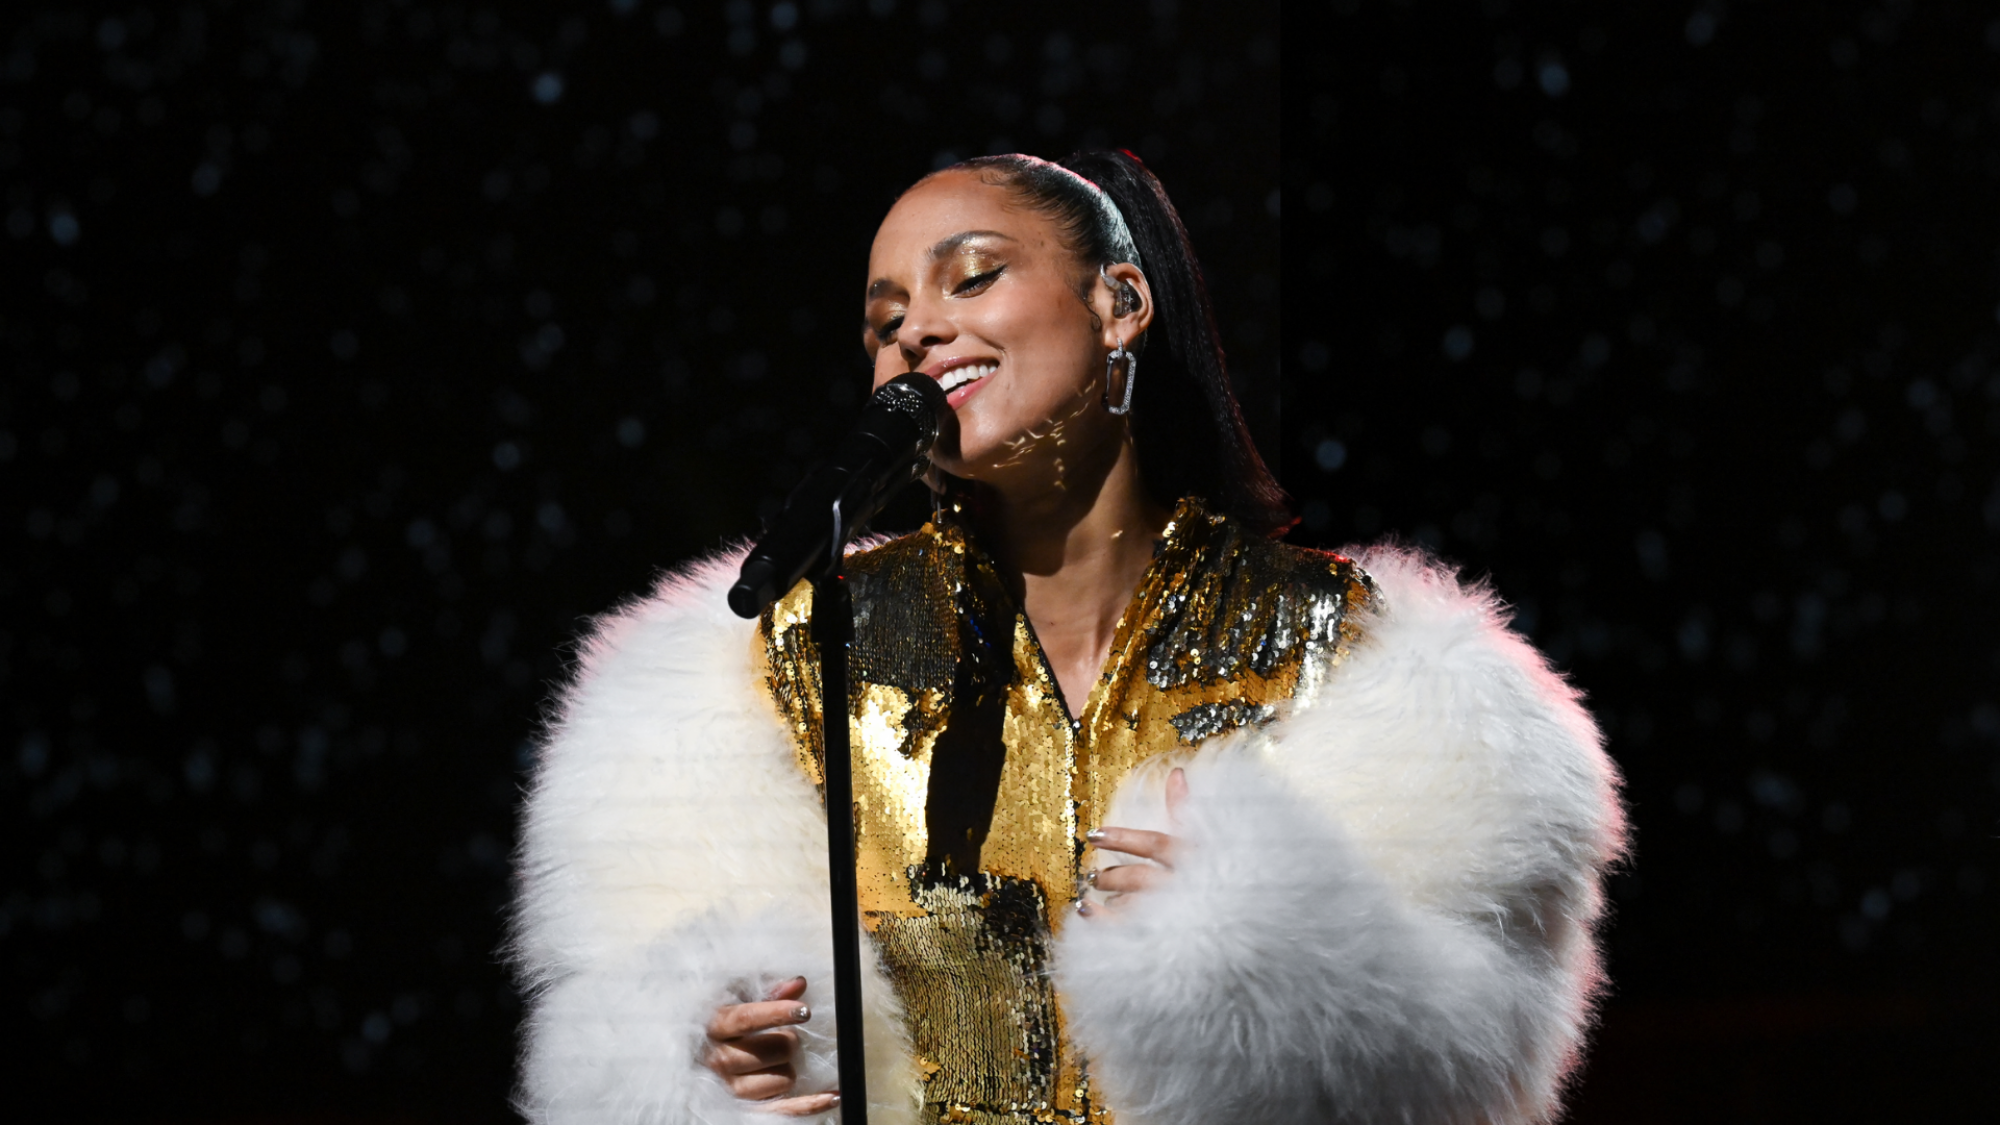 Alicia Keys sings into a black microphone on a stand. She is wearing a gold dress and a white fur stole.